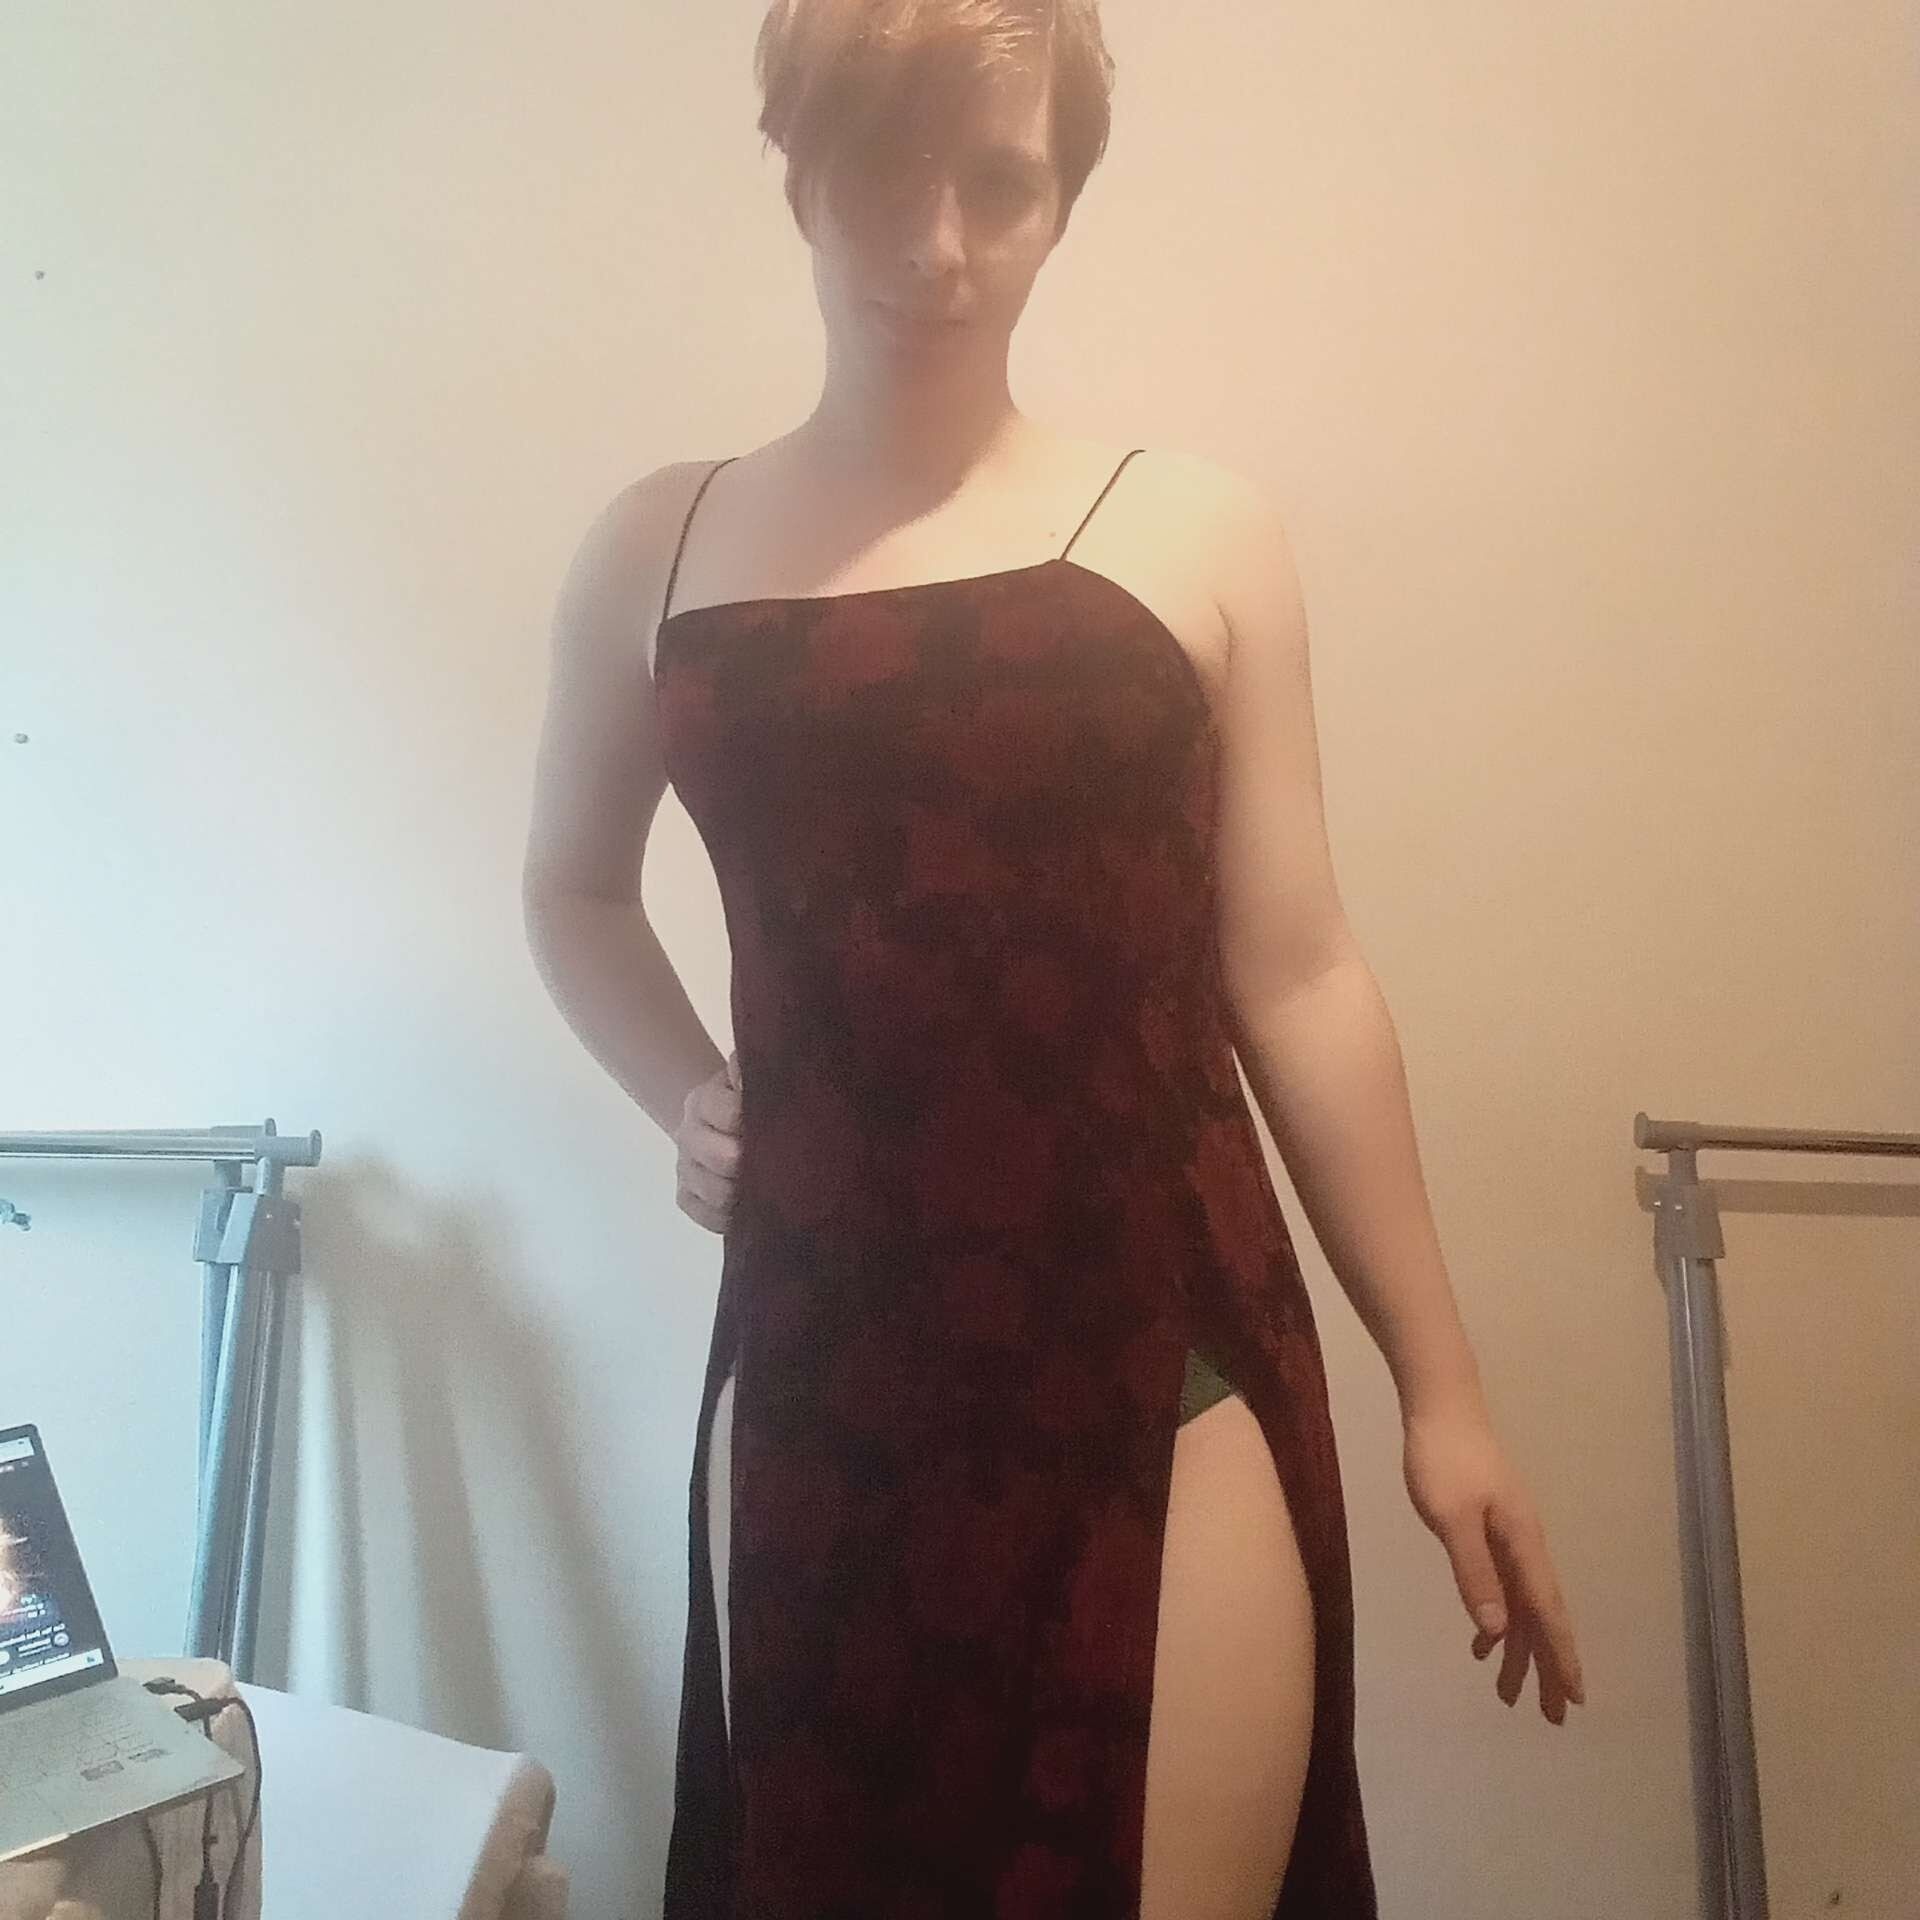 Tgirl welcomes you in her